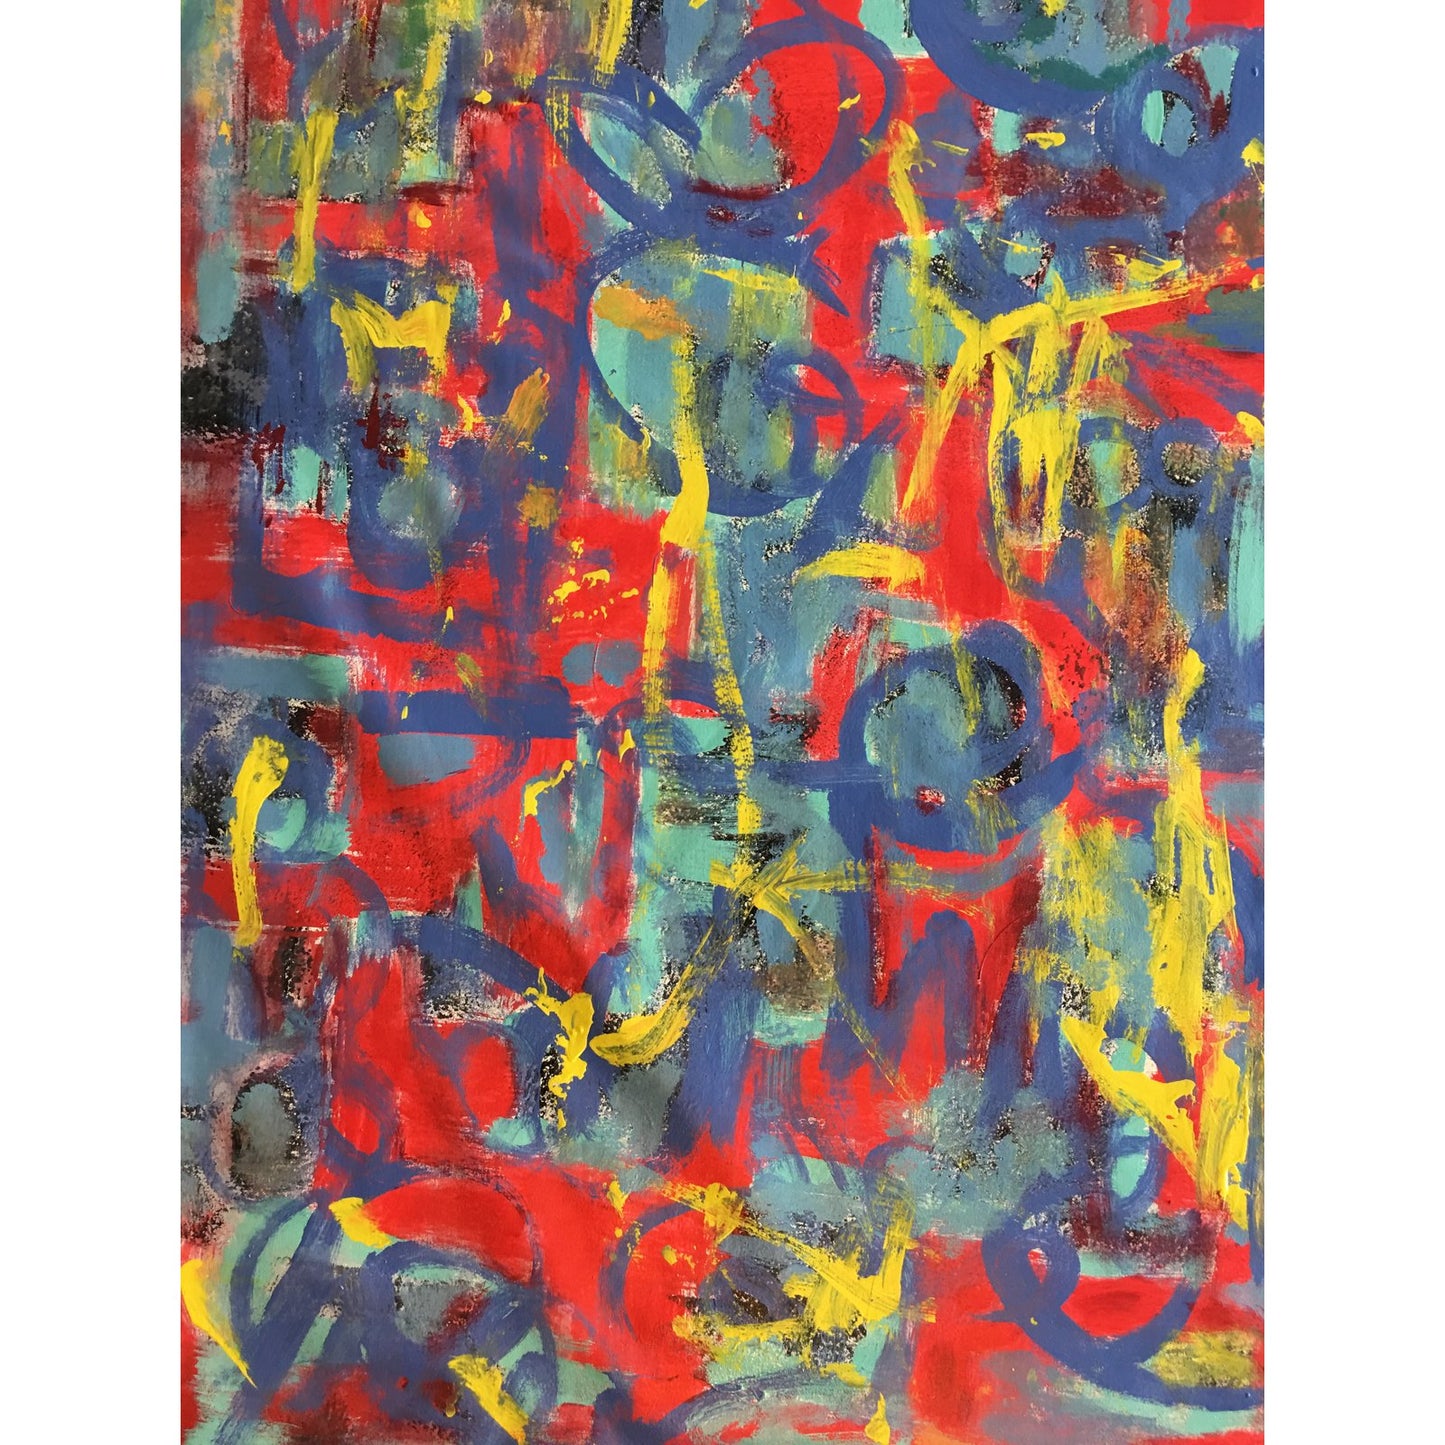 [SOLD] Abstract Acrylic Painting, "What Should I Do?" by Alaina Suga Lane